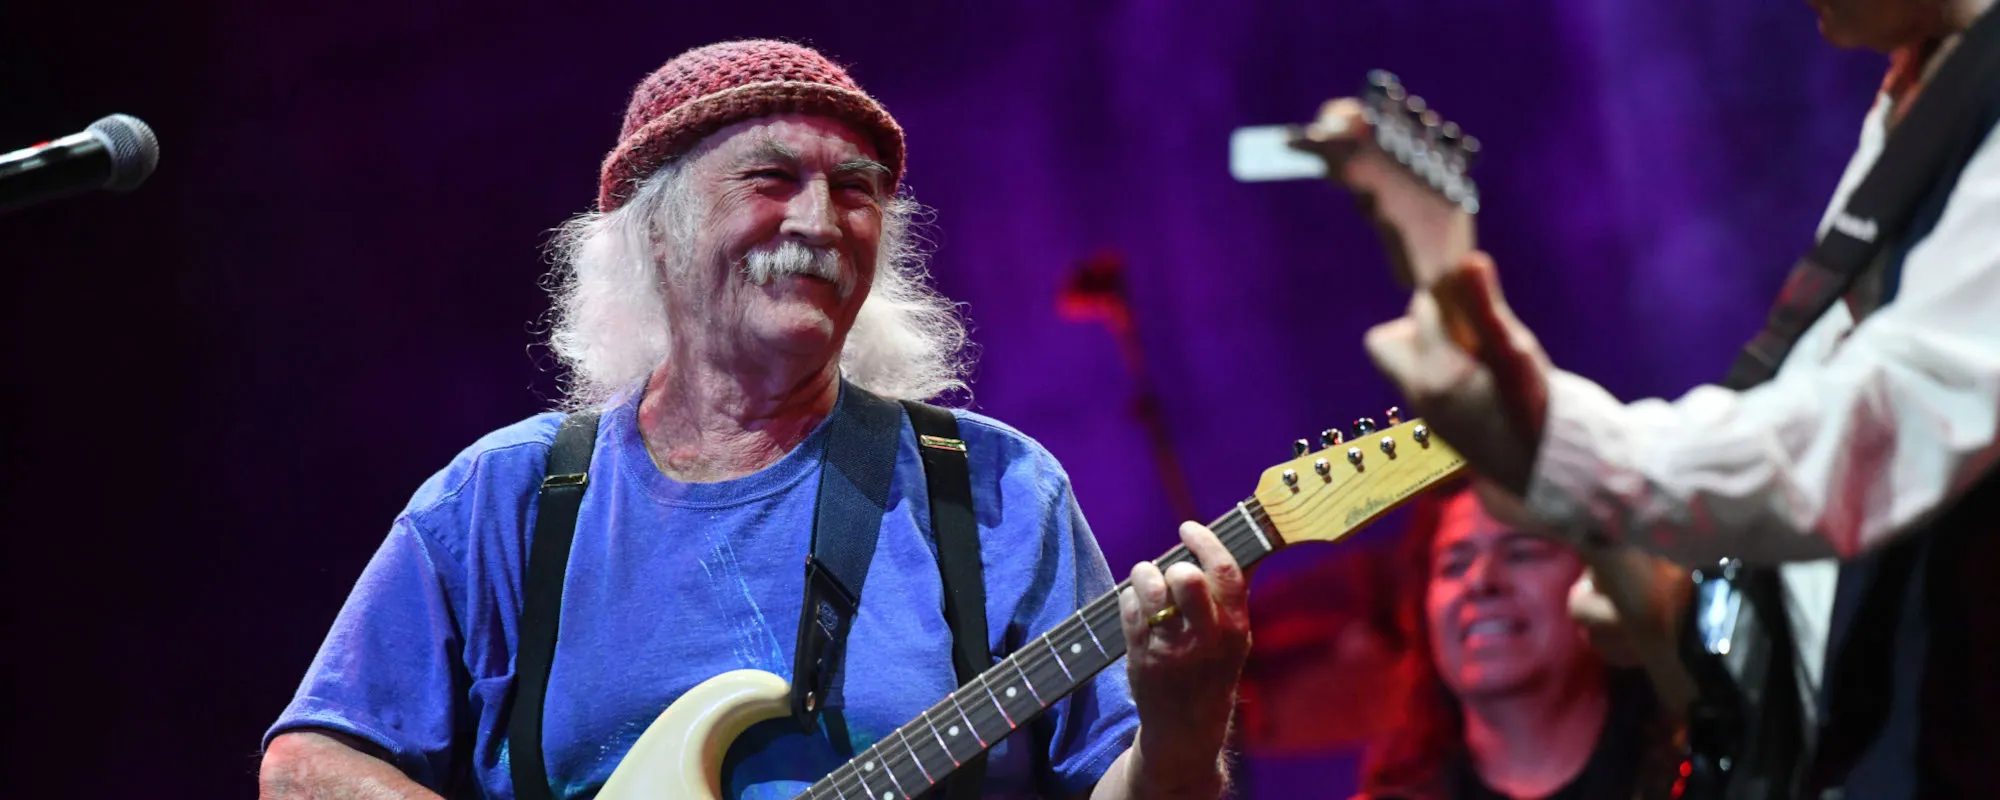 David Crosby Speaks Out About Spotify—”We Support Neil”; Spotify’s Paltry Payout System Takes Center Stage